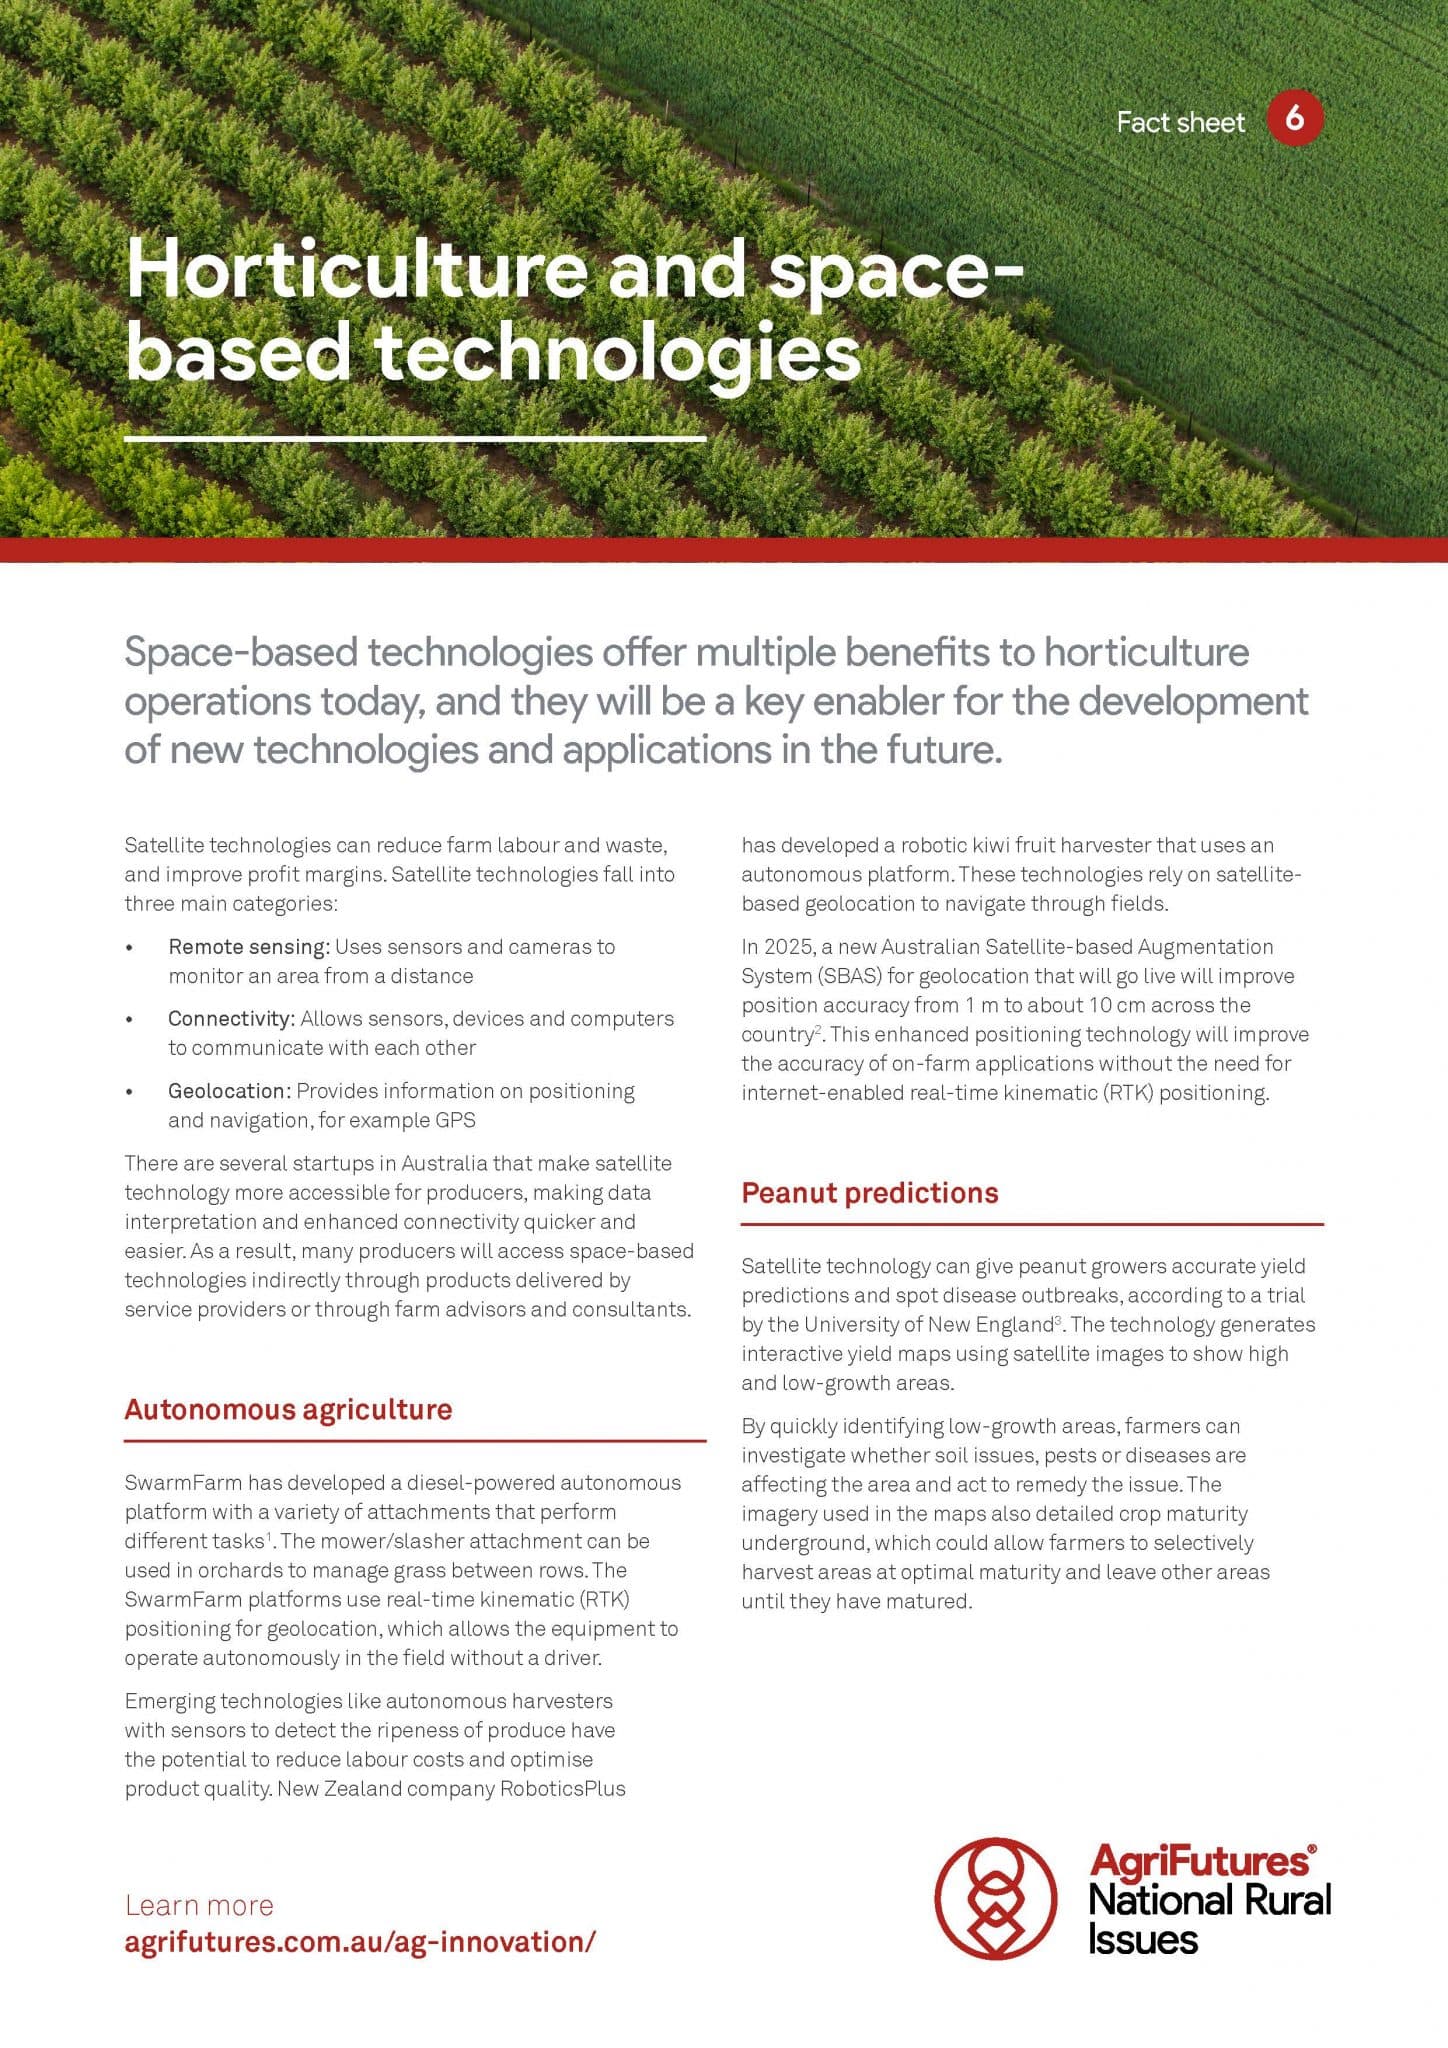 Fact sheet: Horticulture and space-based technologies - image